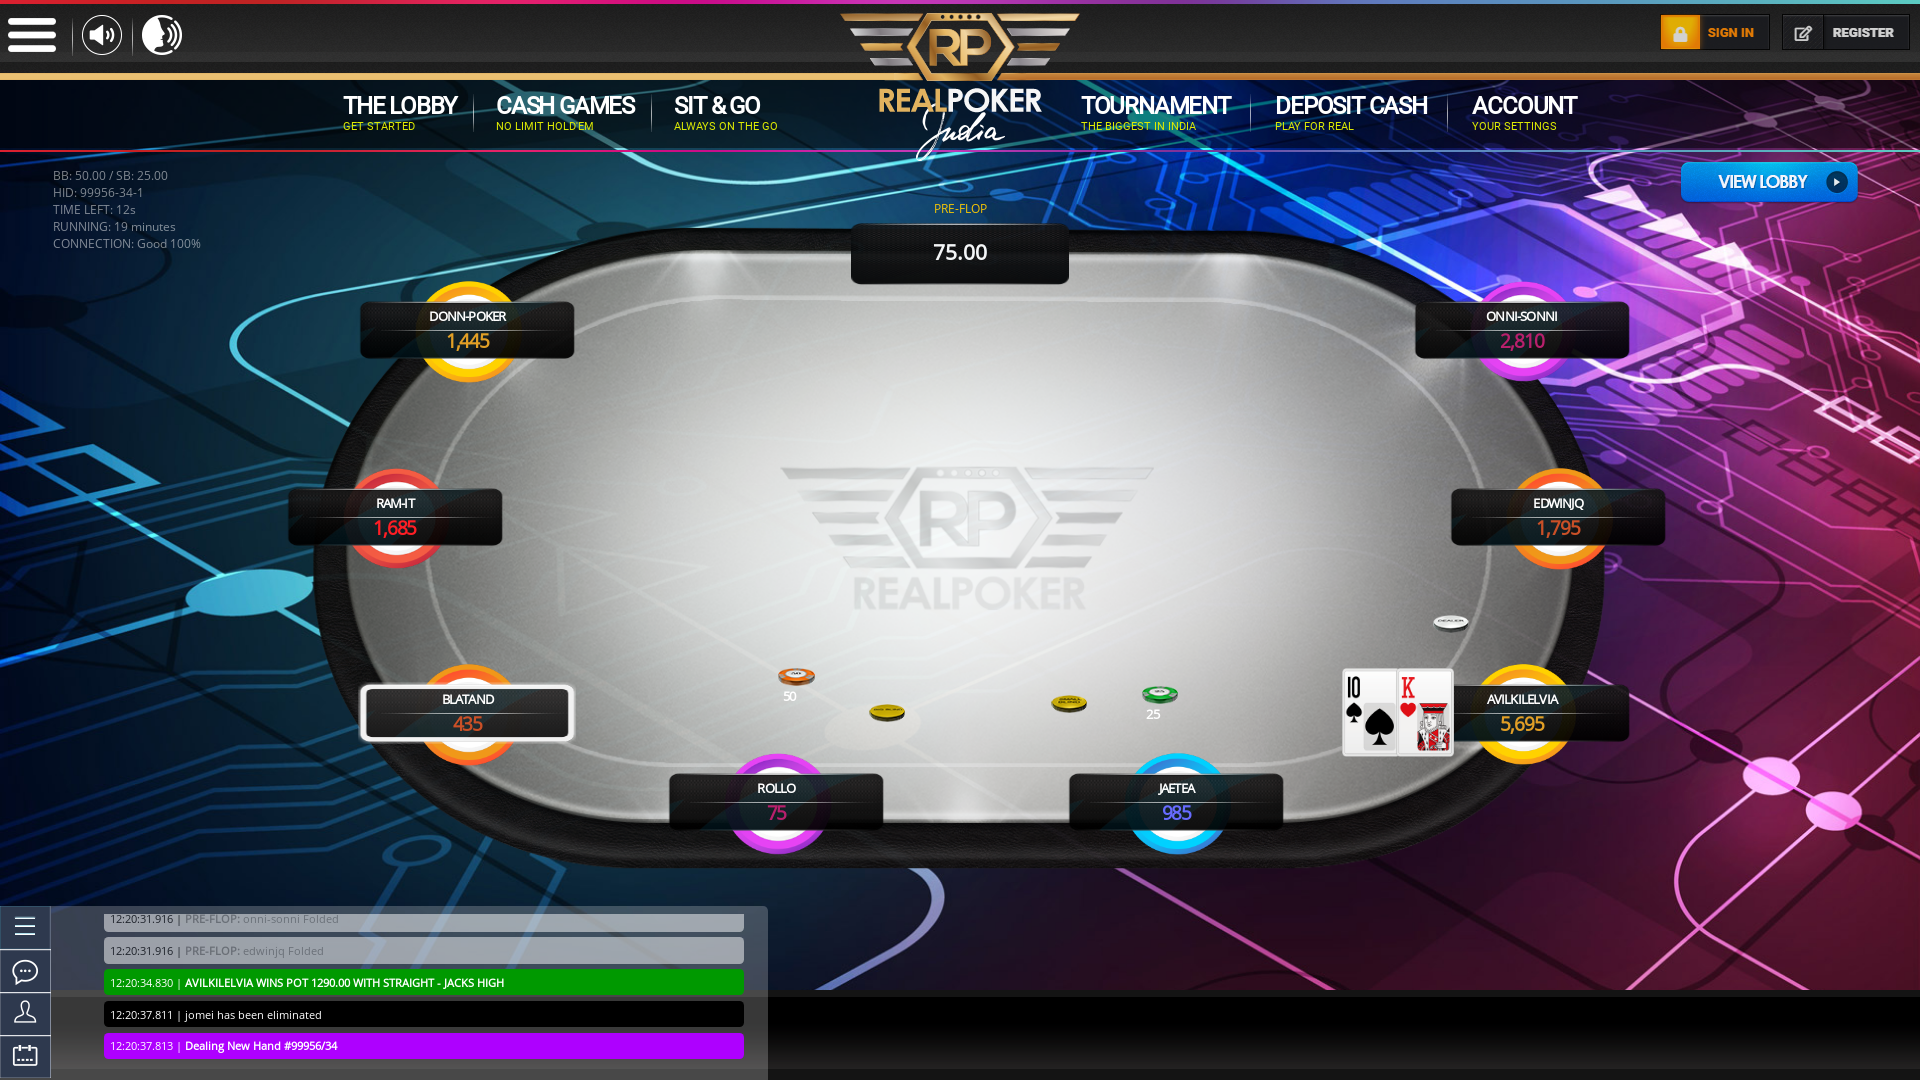 Real poker 10 player table in the 19th minute of the match